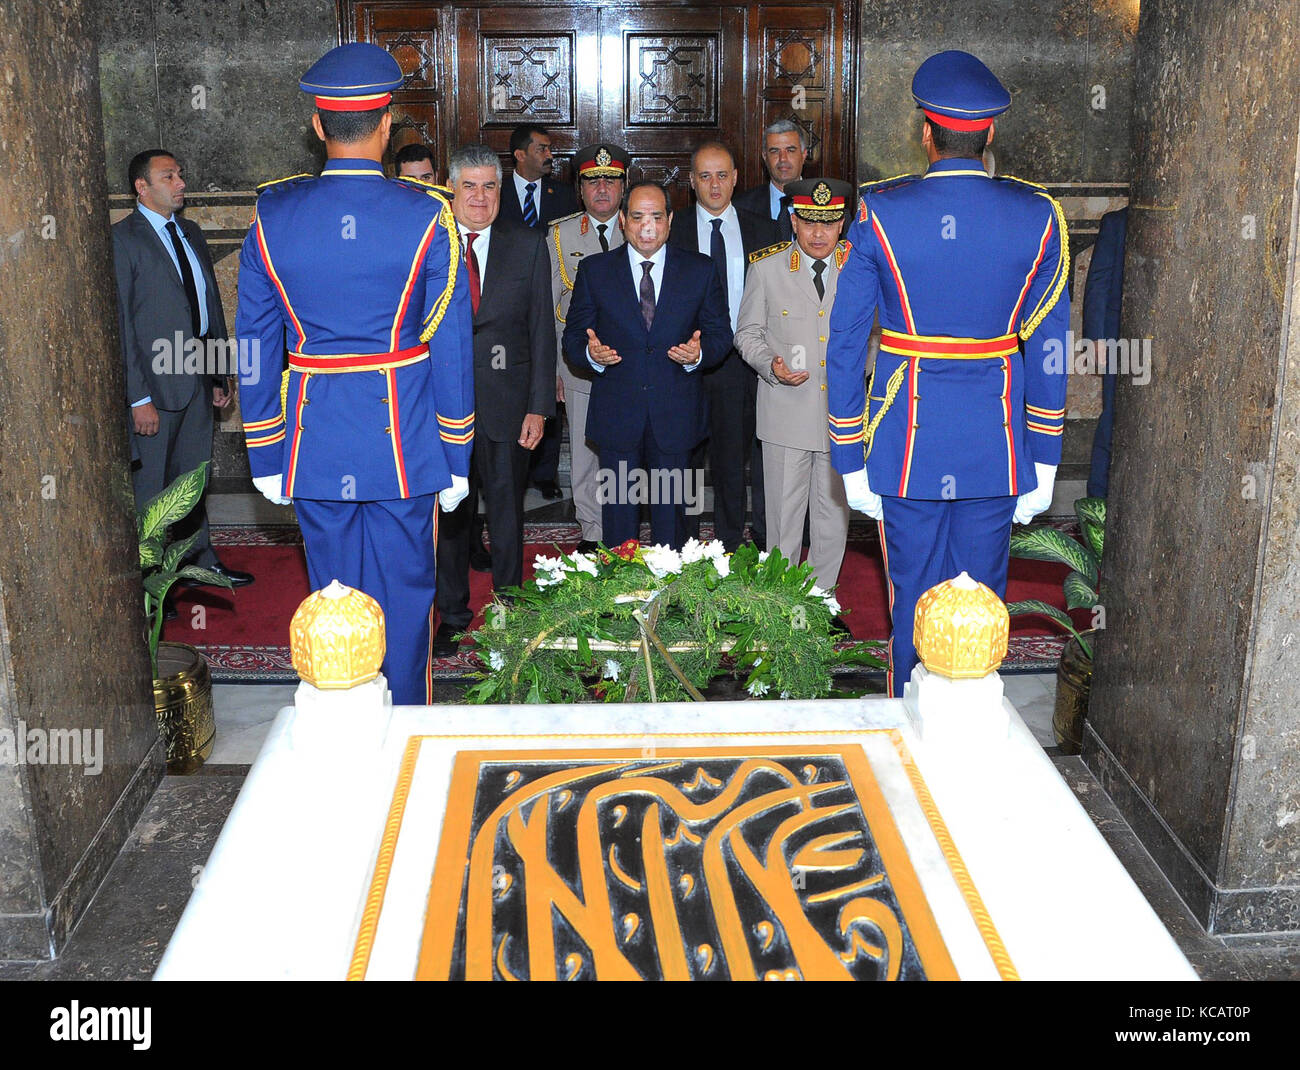 Cairo, Egypt. 4th October, 2017. Egyptian President Abdul Fattah al-Sisi pays his respects in front of the grave of former Egyptian President Gamal Abdel Nasser during a ceremony at the memorial of the Unknown Soldier and tombs of late Egyptian presidents on Octobeober 4, 2017 in Cairo, as part of the celebrations marking the 42th anniversary of Octobeober War Victory Credit: Egyptian President Office/APA Images/ZUMA Wire/Alamy Live News Stock Photo